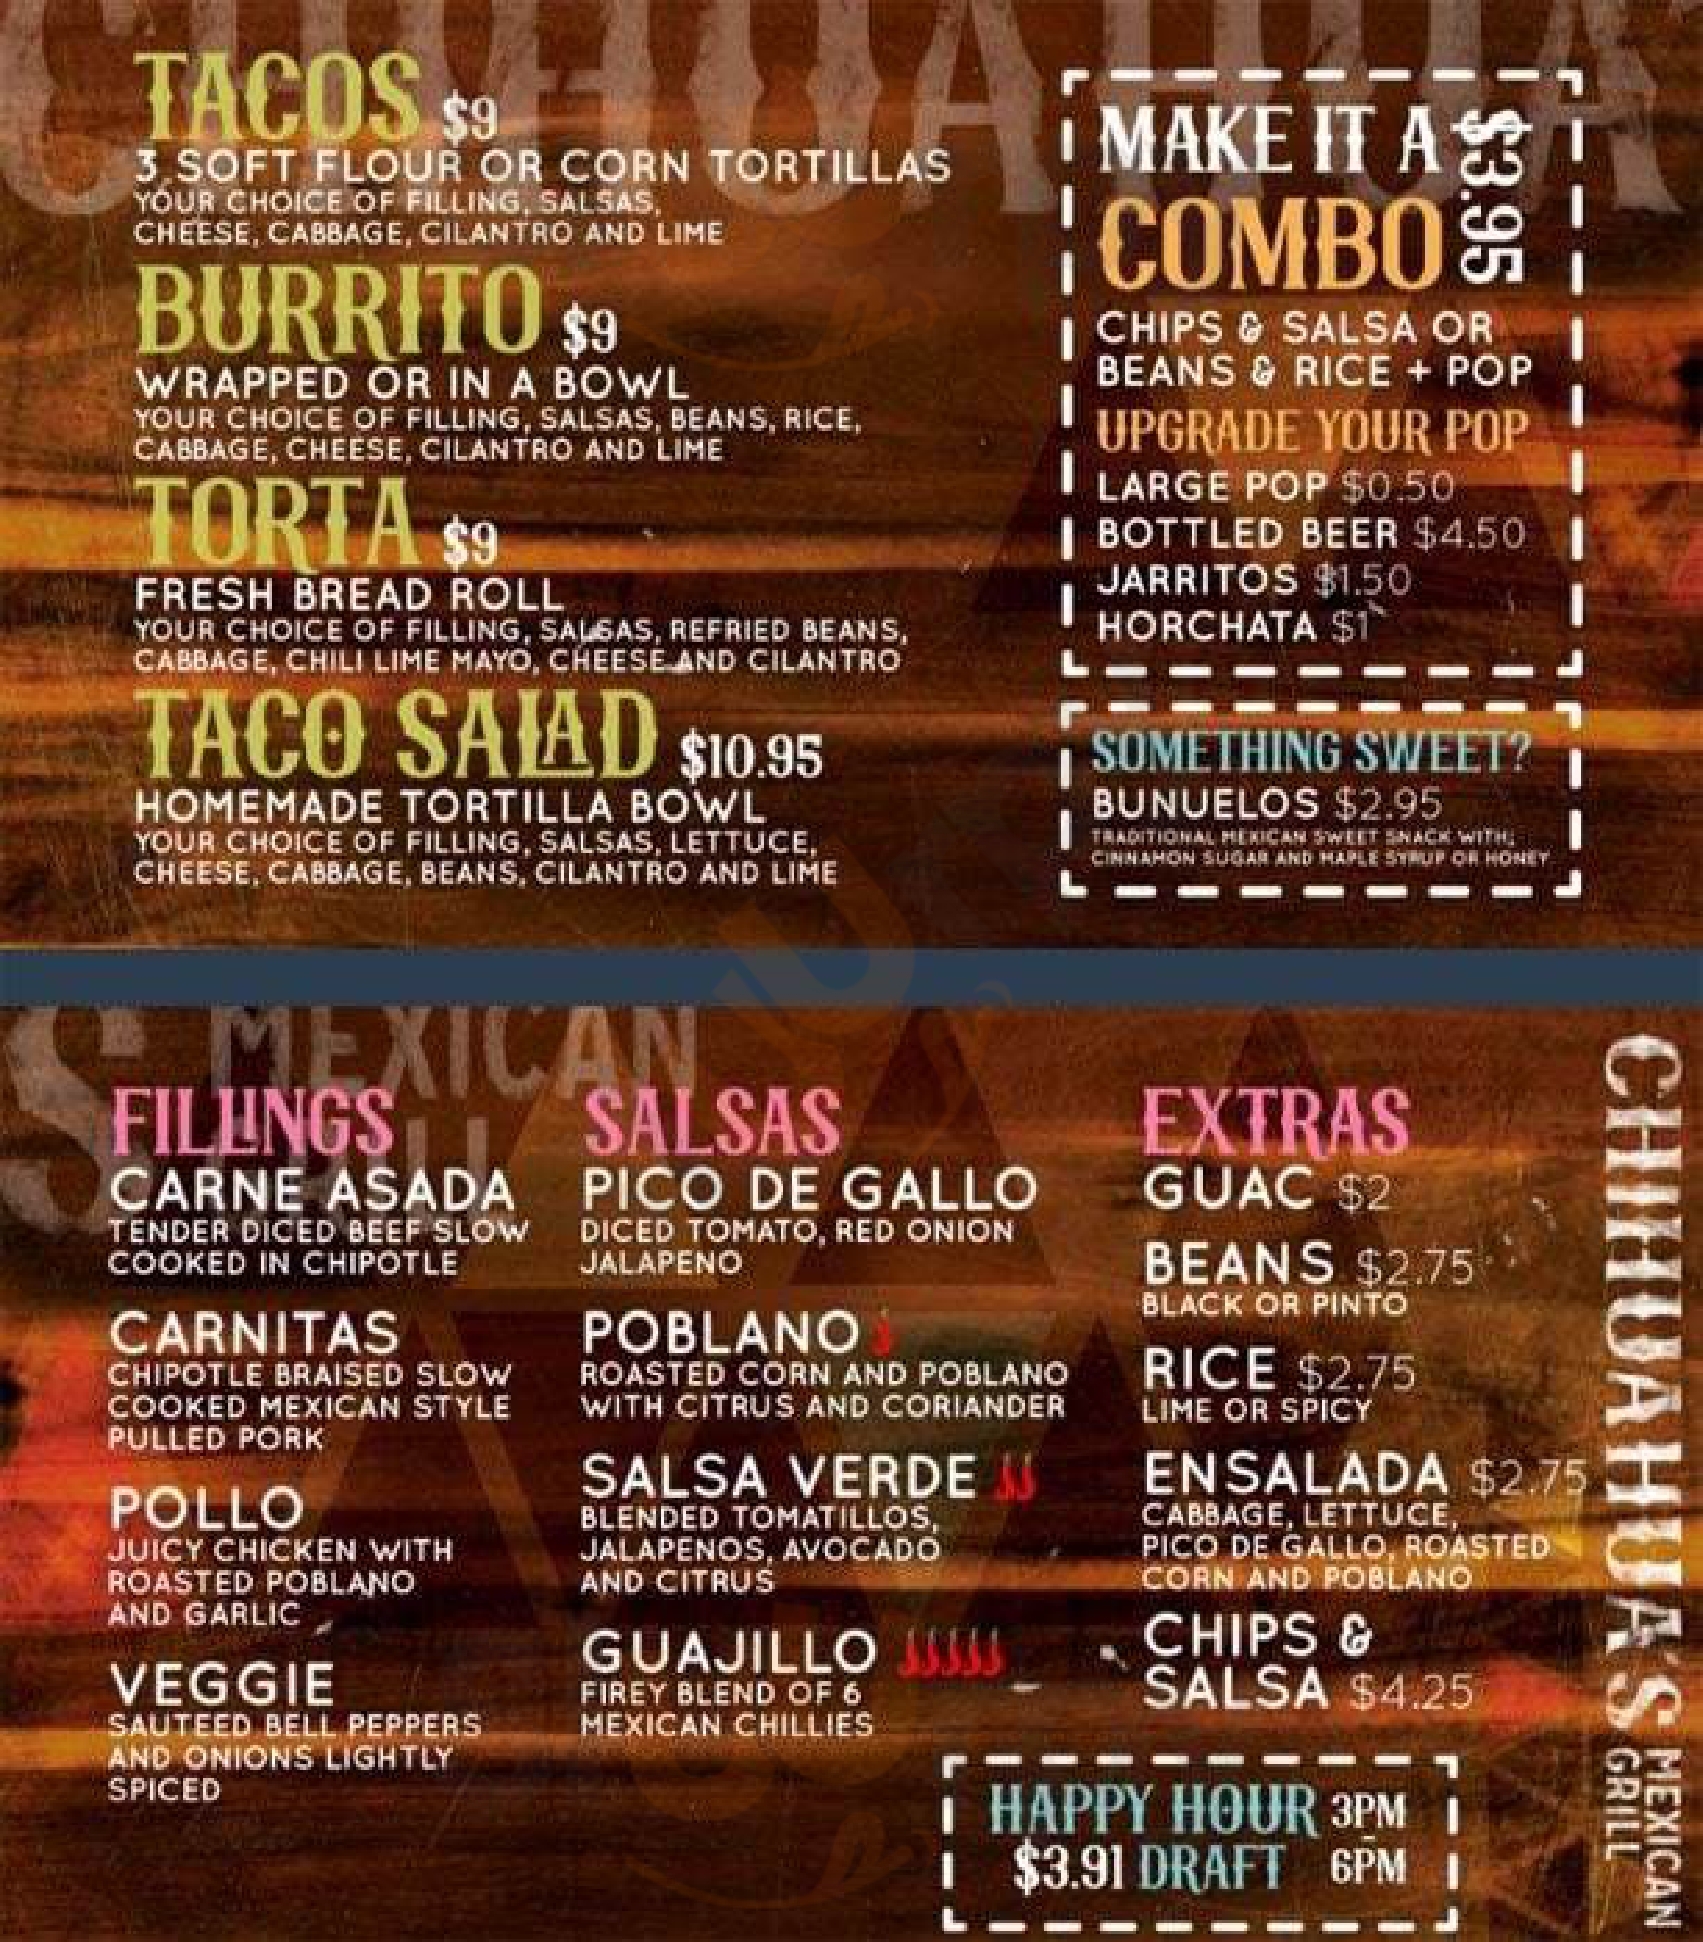 Chihuahua's Mexican Grill Vancouver Menu - 1